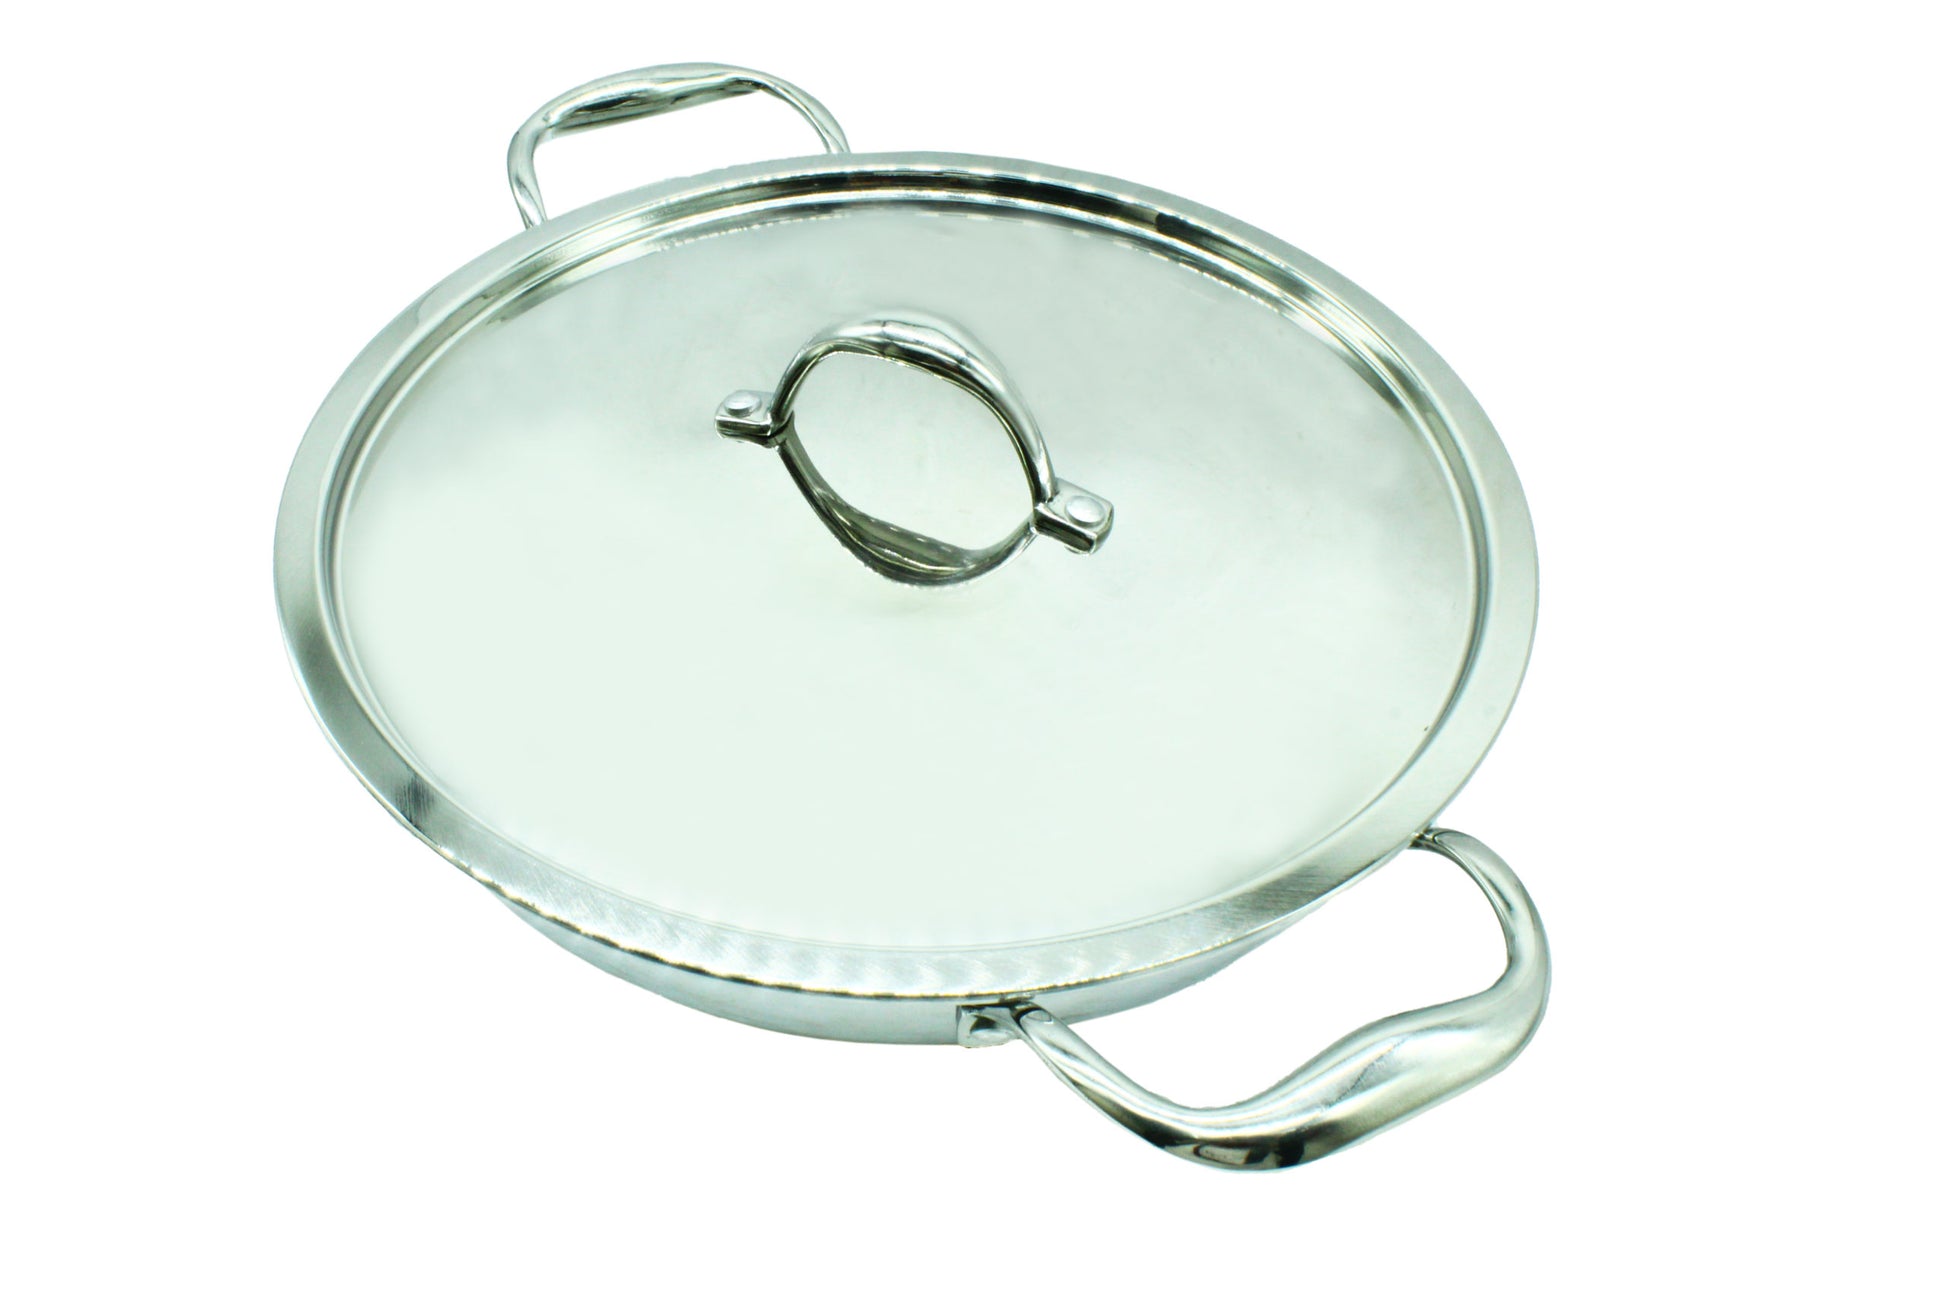 Kitchen Expert Stainless Steel Hammered Kadhai/Paella Pan for Cooking and Serving, 8 inch, 1 Litre Capacity (with Handles)